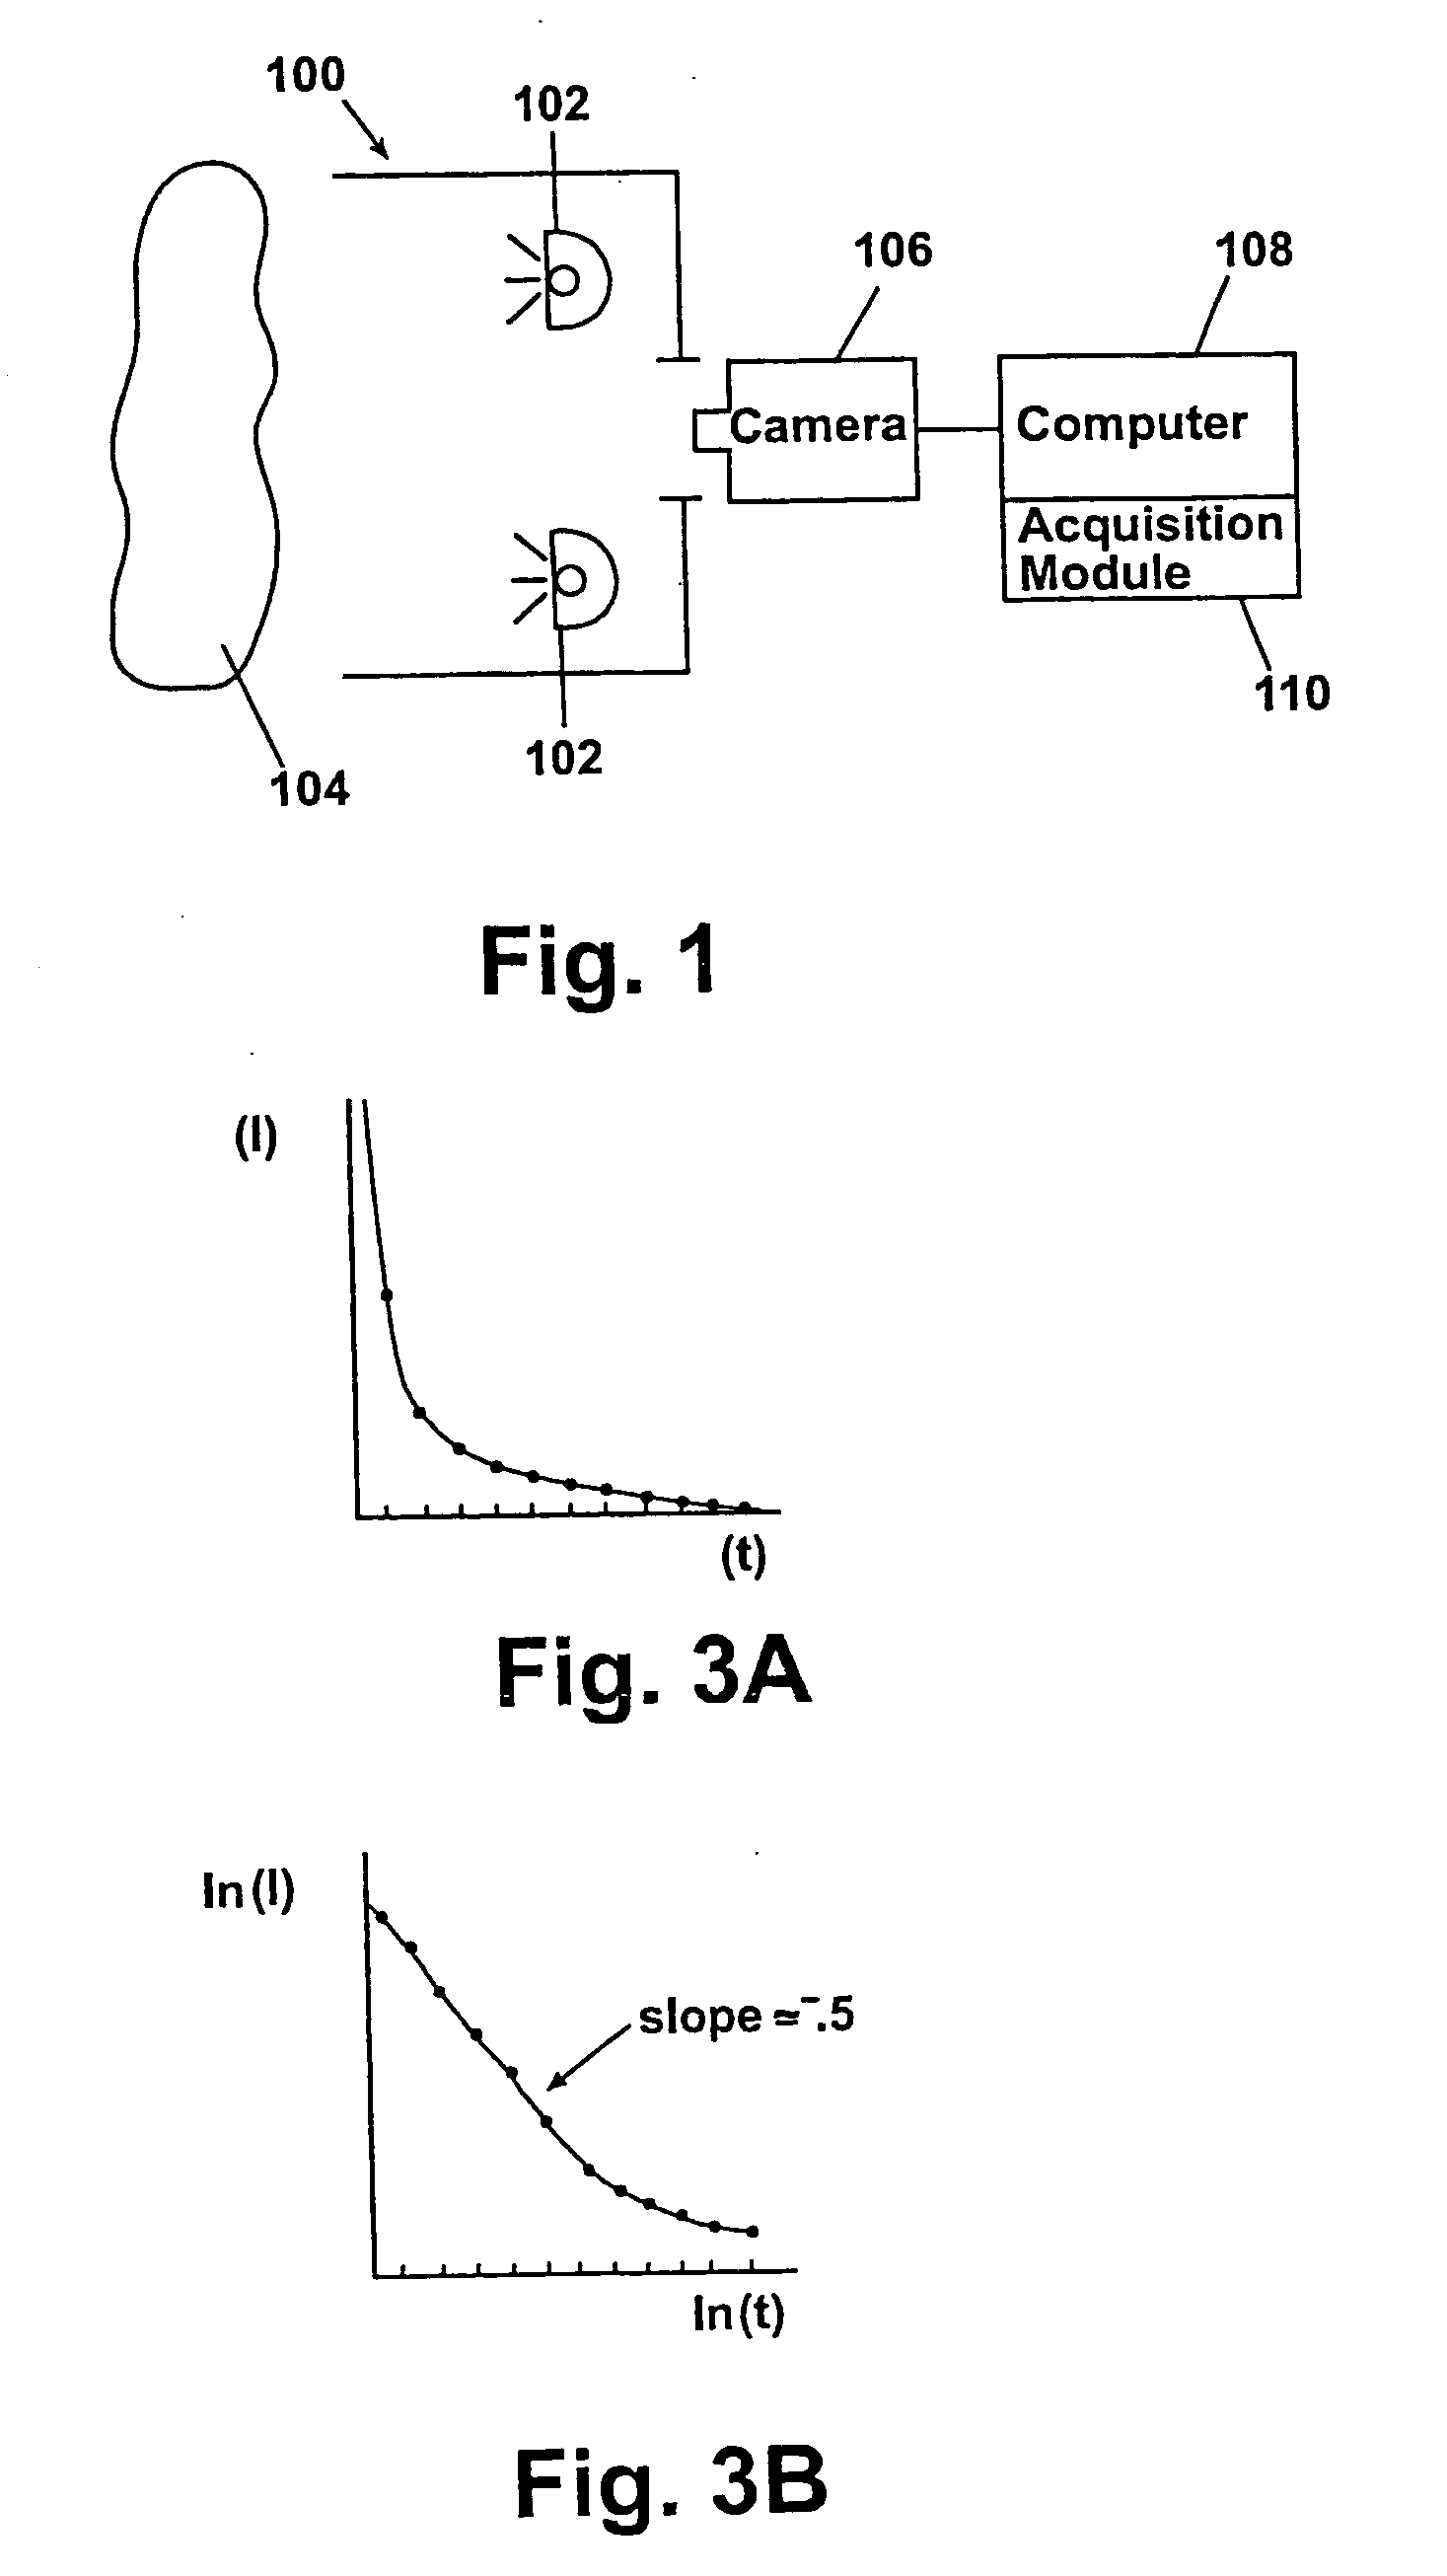 System for generating thermographic images using thermographic signal reconstruction